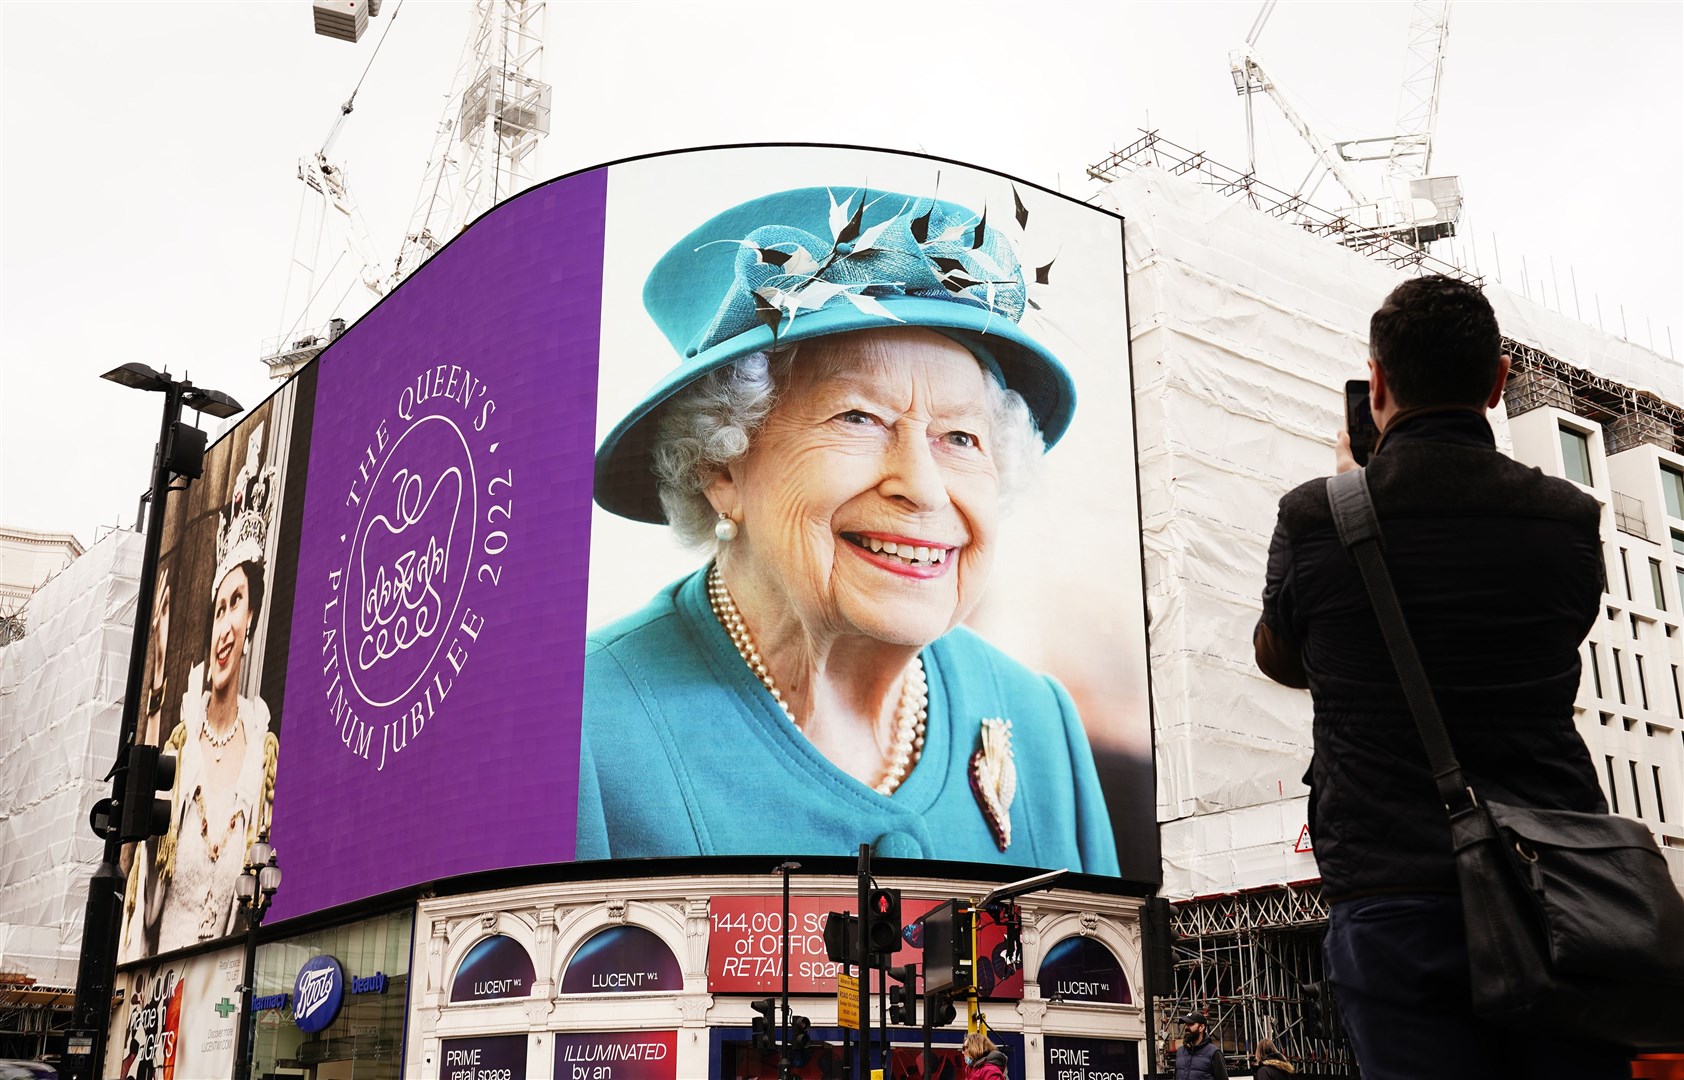 Images of the Queen were displayed on the lights in London’s Piccadilly Circus to mark her Platinum Jubilee (Ian West/PA)